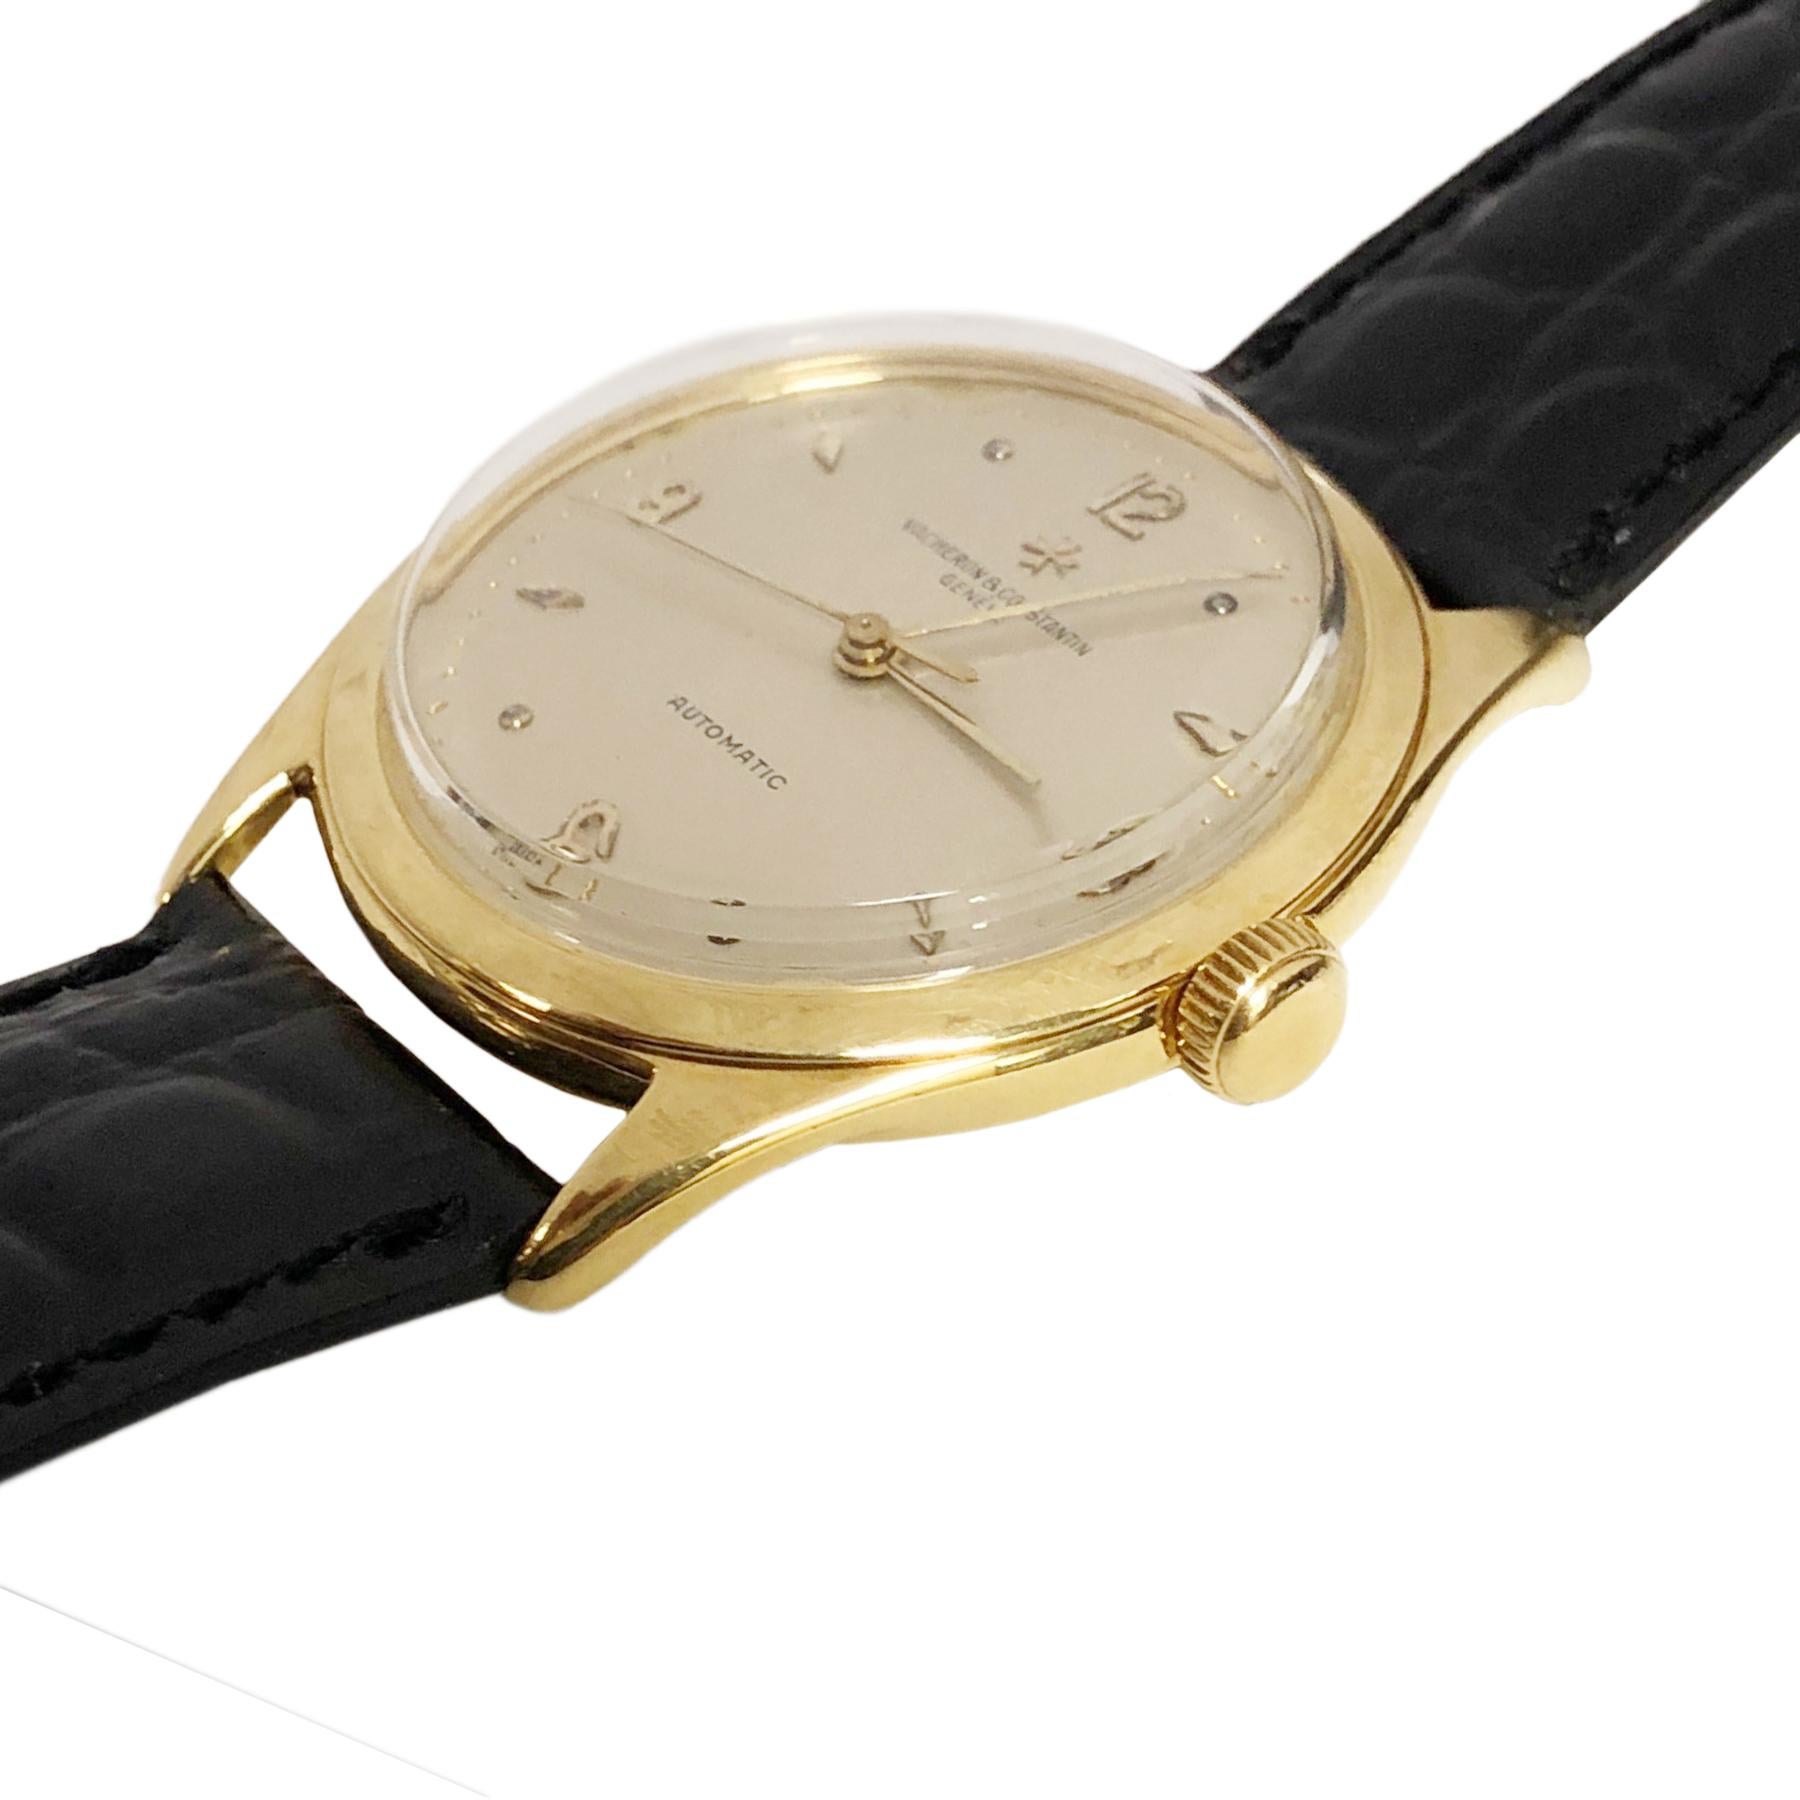 Circa 1950s Vacheron & Constantin Wrist watch, 36 MM 18K Yellow Gold Water proof case, Automatic, self winding movement, original Excellent mint condition Silvered dial with raised gold markers and a sweep seconds hand. New DeBeer Black Alligator